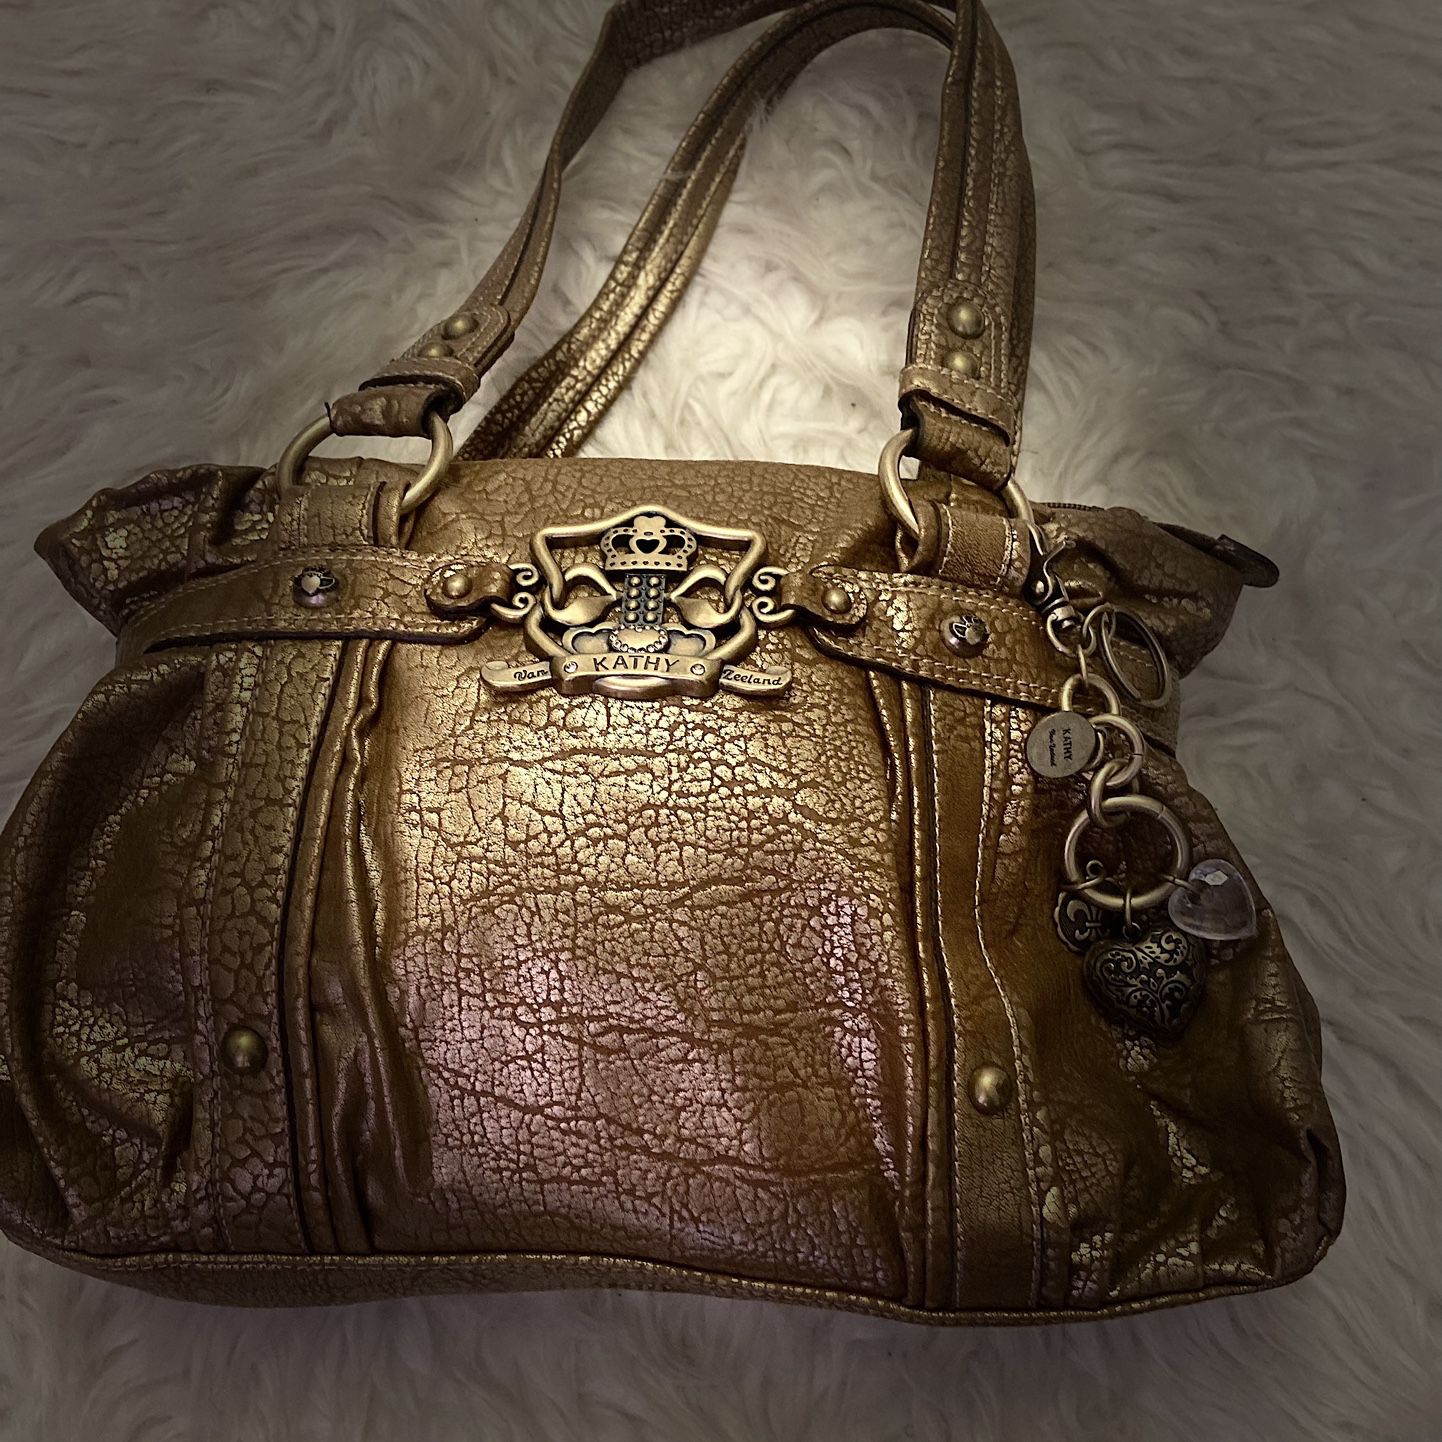 Women's Computer Bag for Sale in Columbia, MD - OfferUp